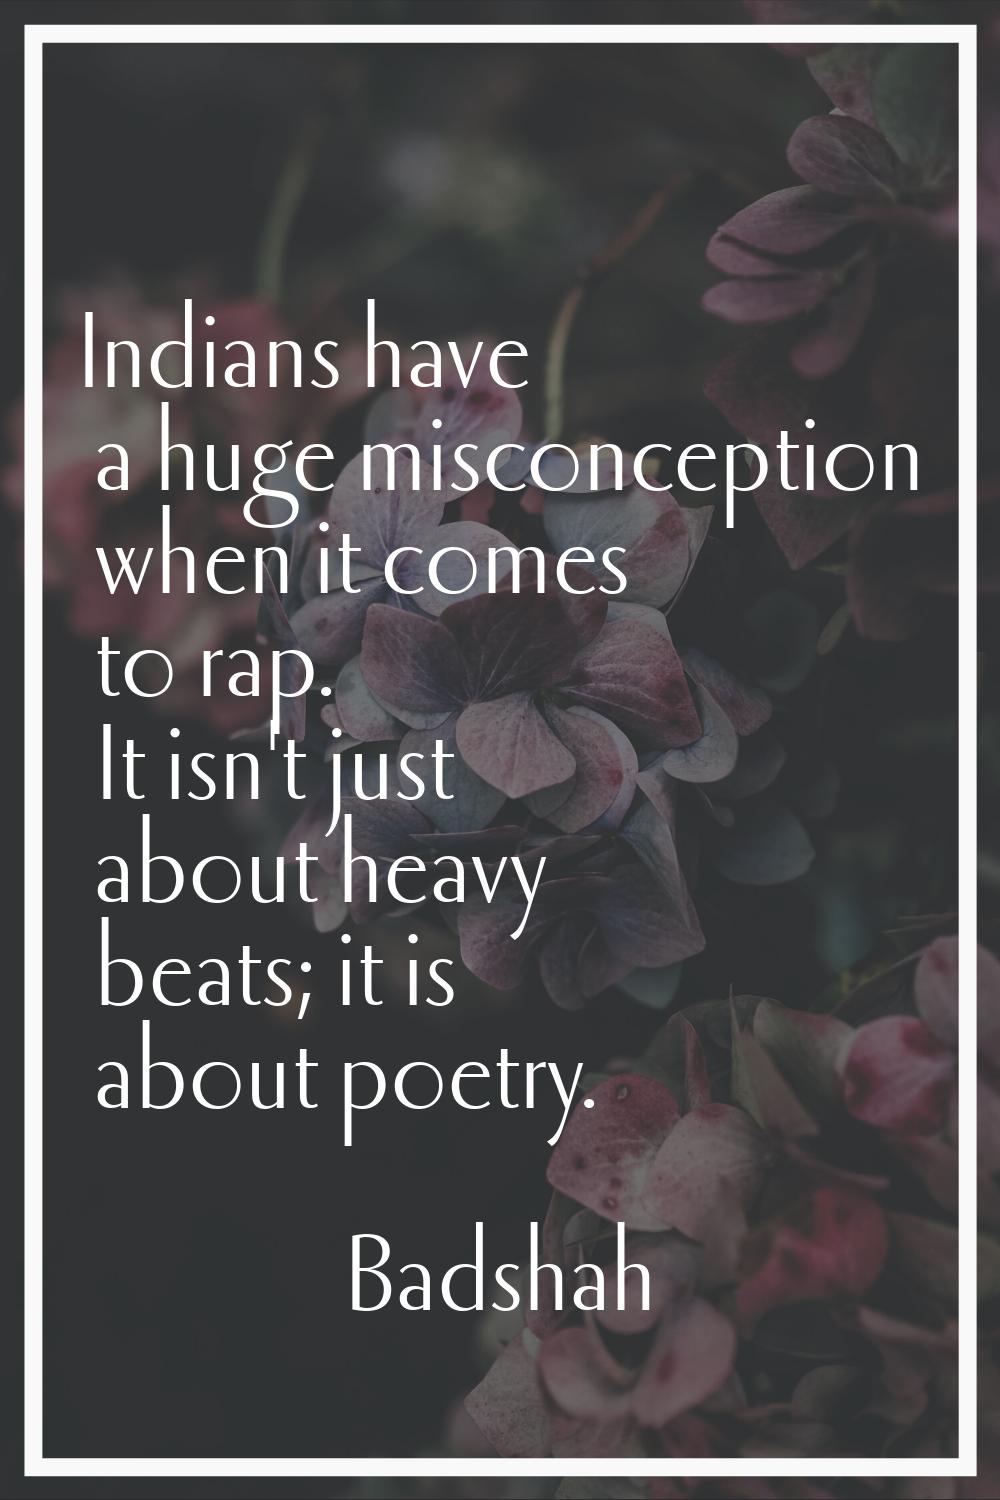 Indians have a huge misconception when it comes to rap. It isn't just about heavy beats; it is abou